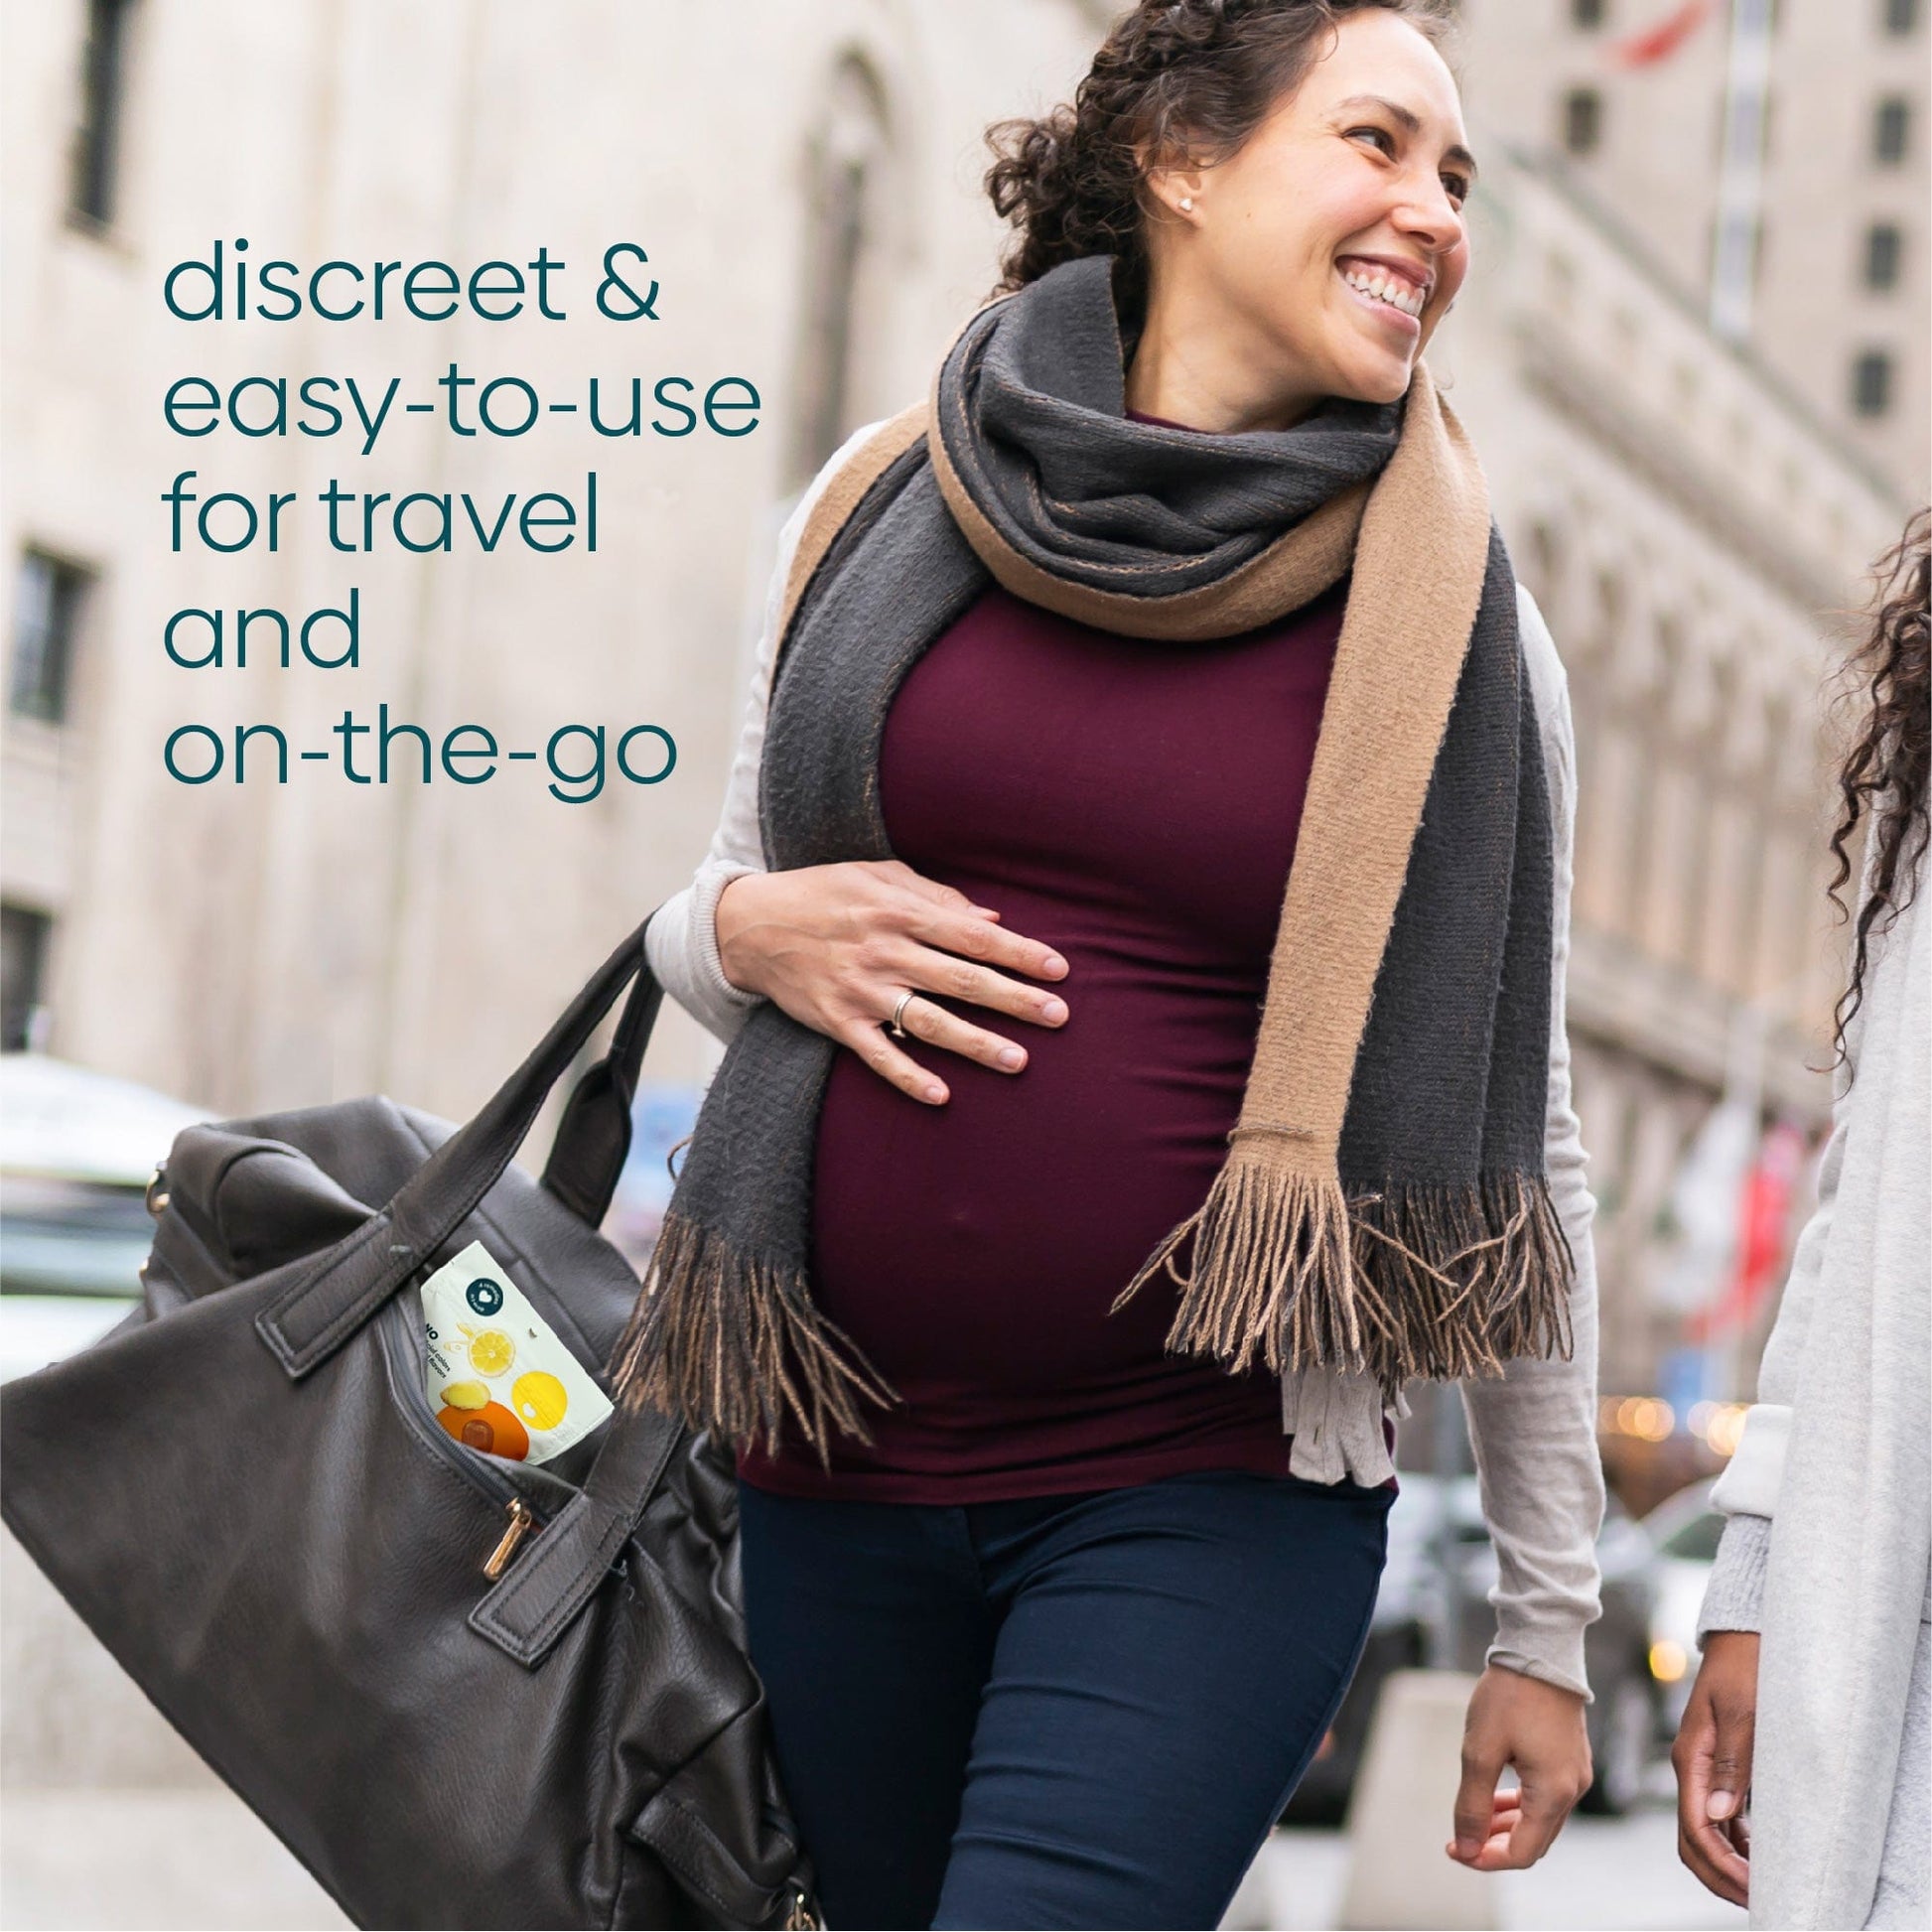 A pregnant woman holding a large bag with Stomach Settle drops inside walks happily with a friend 